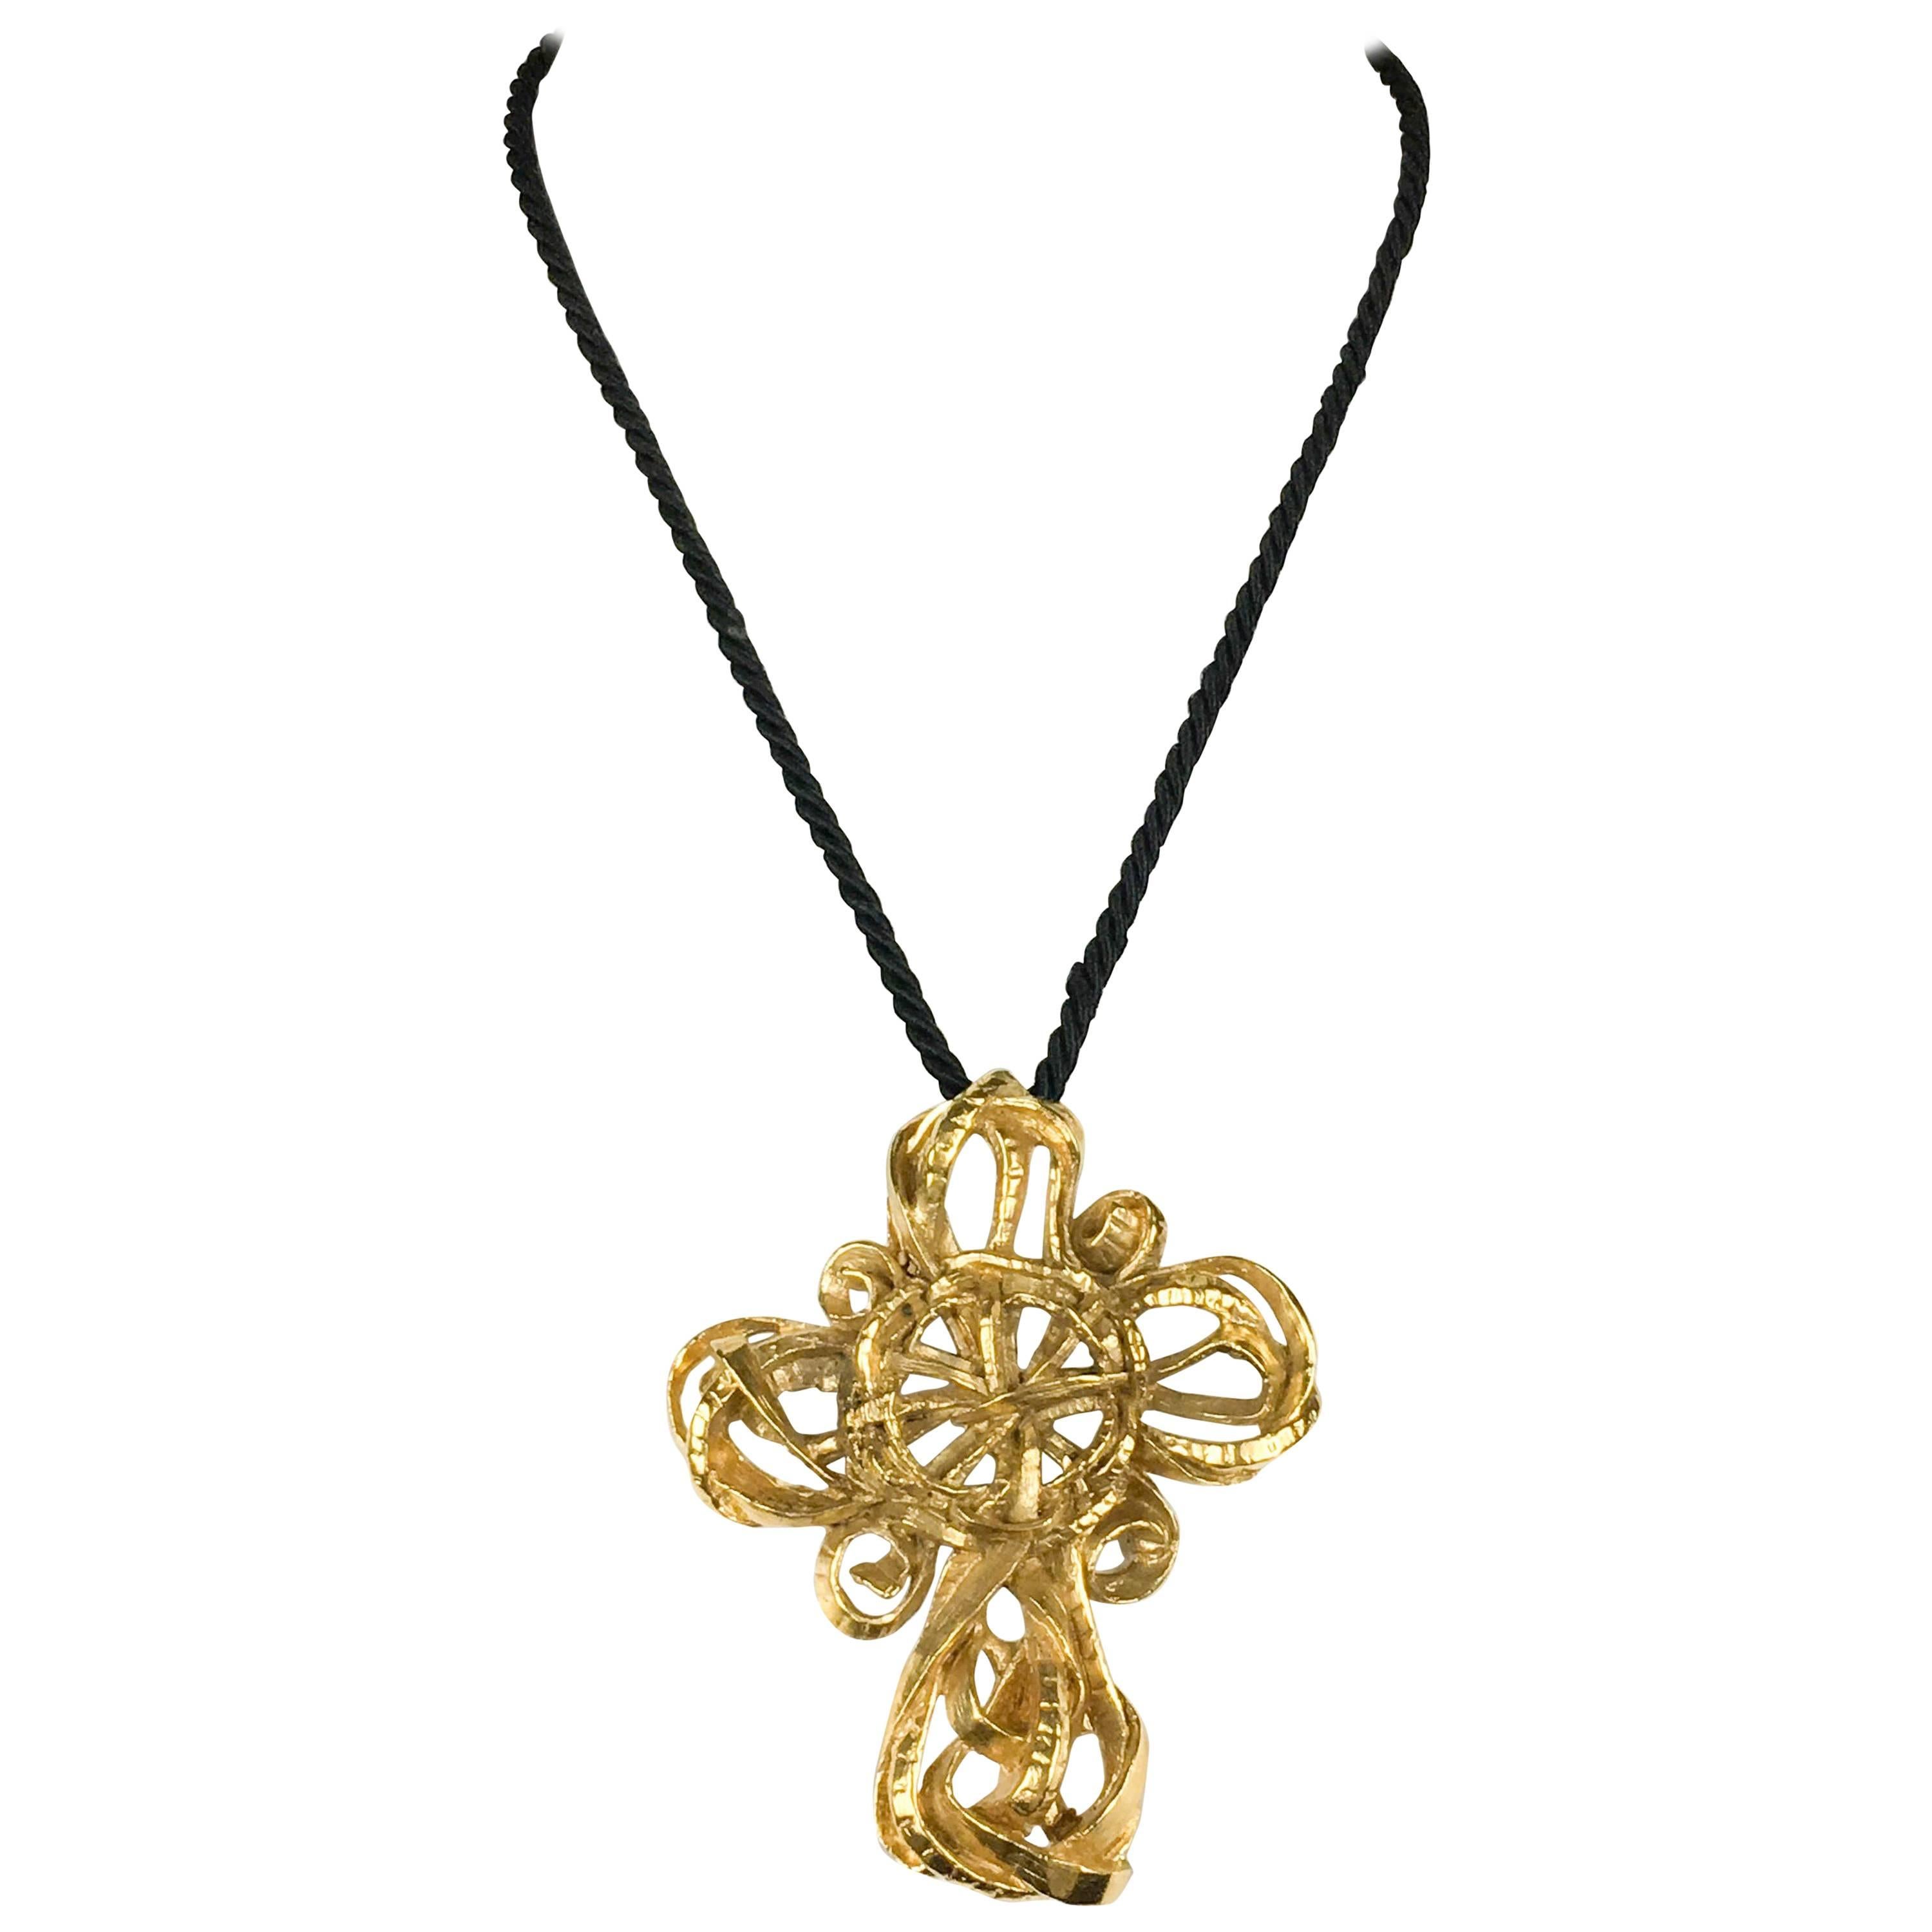 1980's Lacroix Stylised Cross Pendant Necklace / Brooch